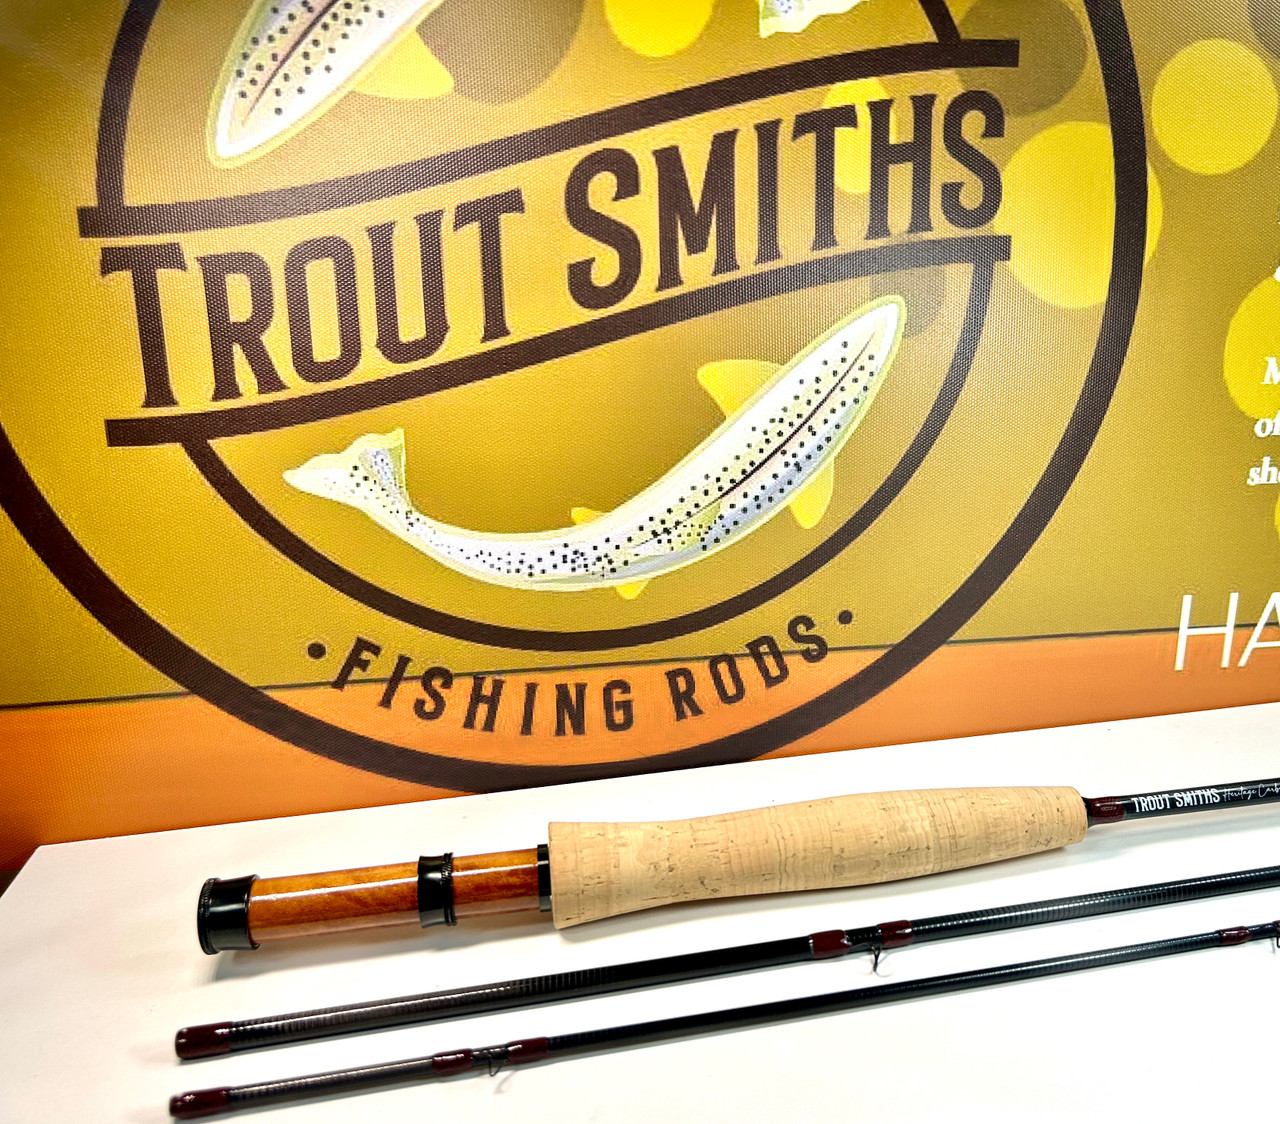 Trout Smiths Rods